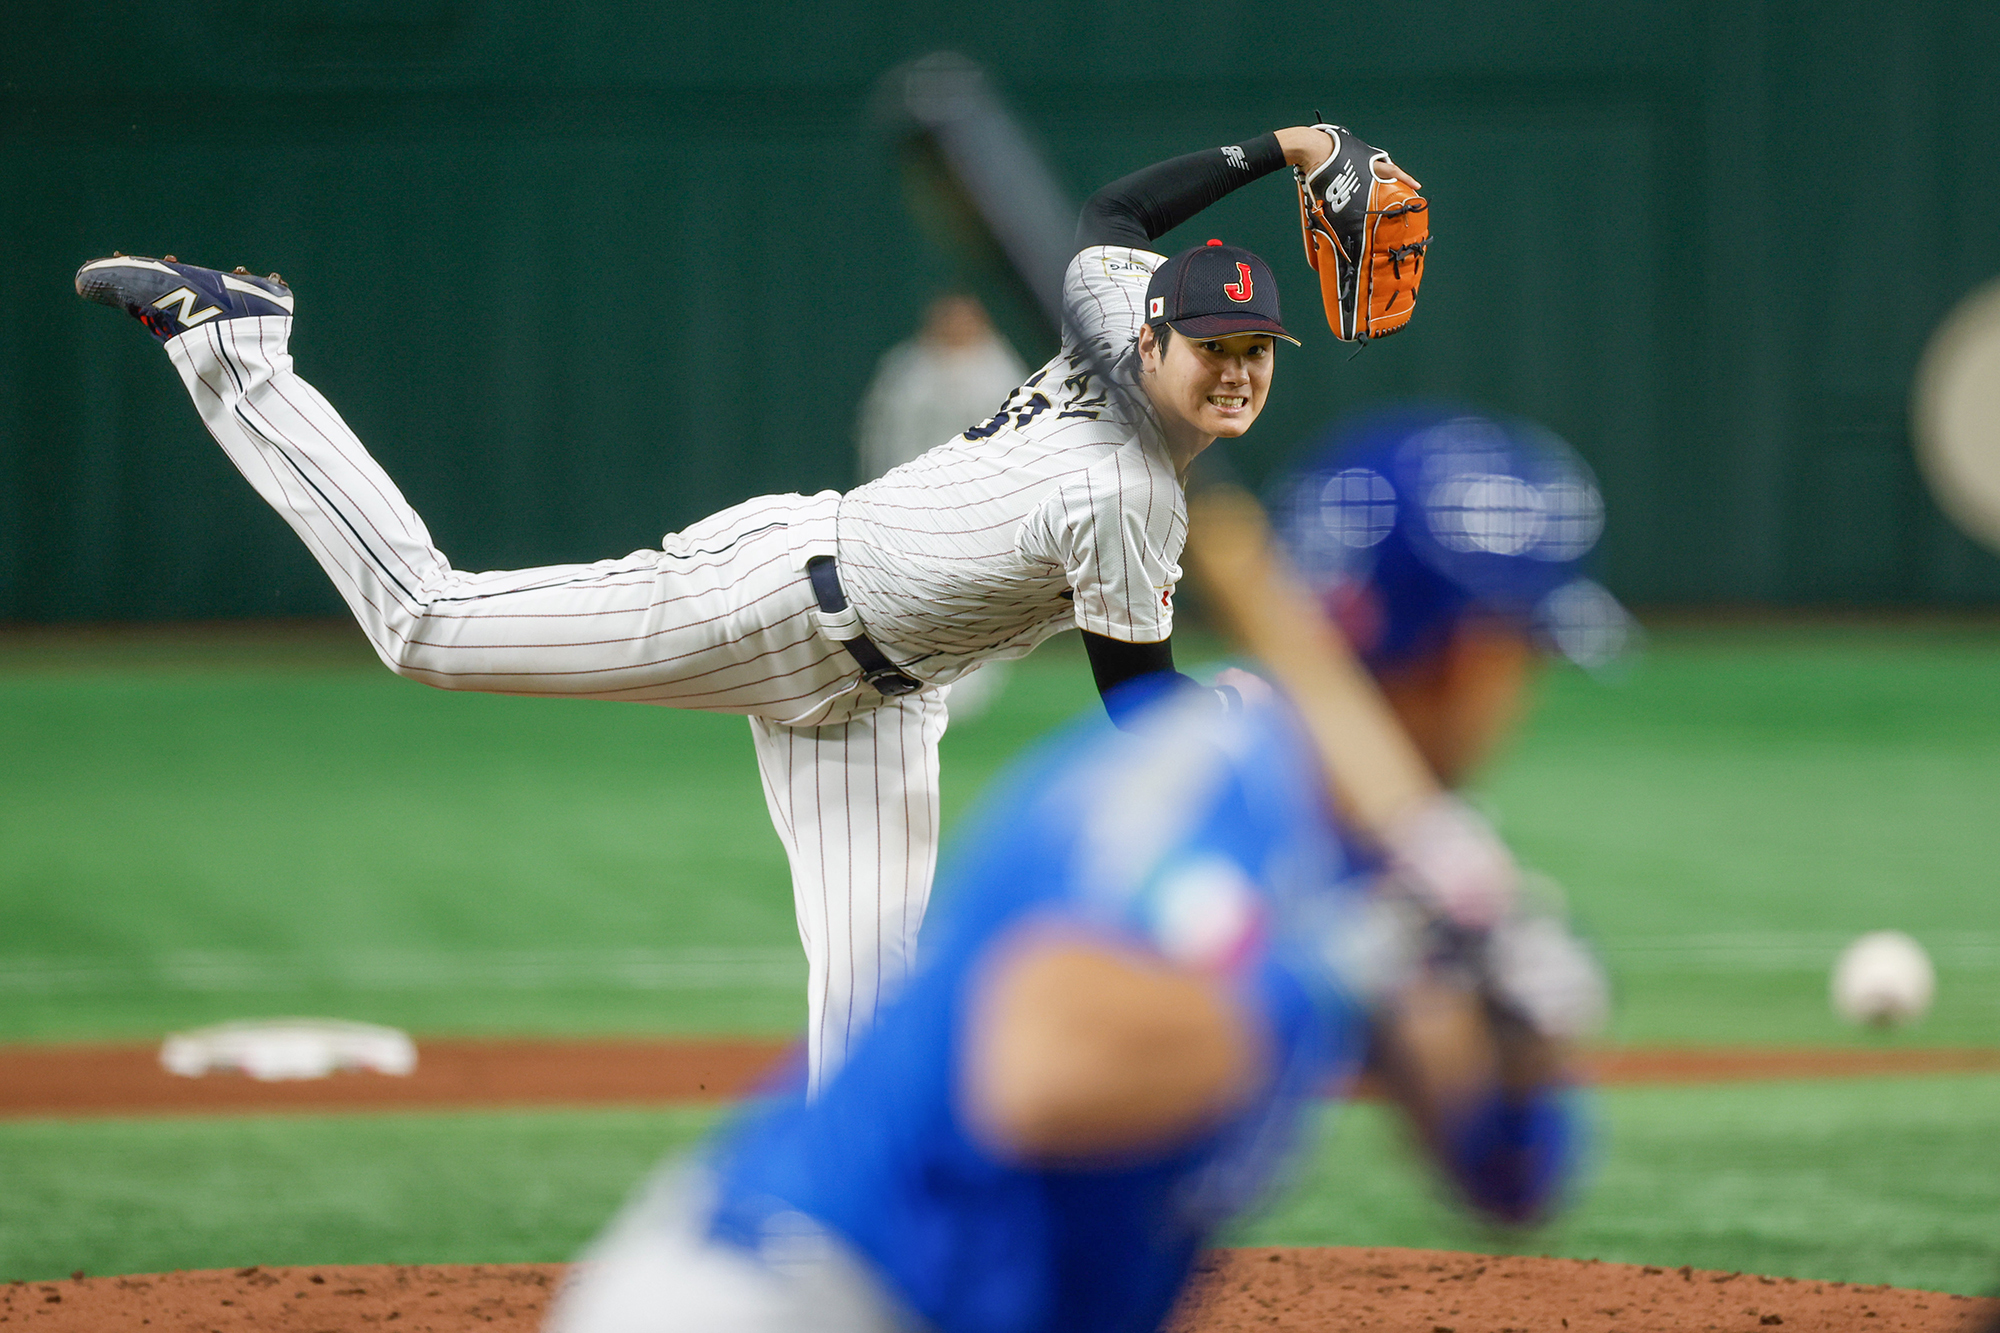 BUNKYO CITY, JAPAN - MARCH 16: Shohei Ohtani #16 of Team Japan pitches in the fifth inning during the 2023 World Baseball Classic Quarterfinal game between Team Italy and Team Japan at Tokyo Dome on Thursday, March 16, 2023 in Tokyo, Japan. (Photo by Yuki Taguchi/WBCI/MLB Photos via Getty Images) 